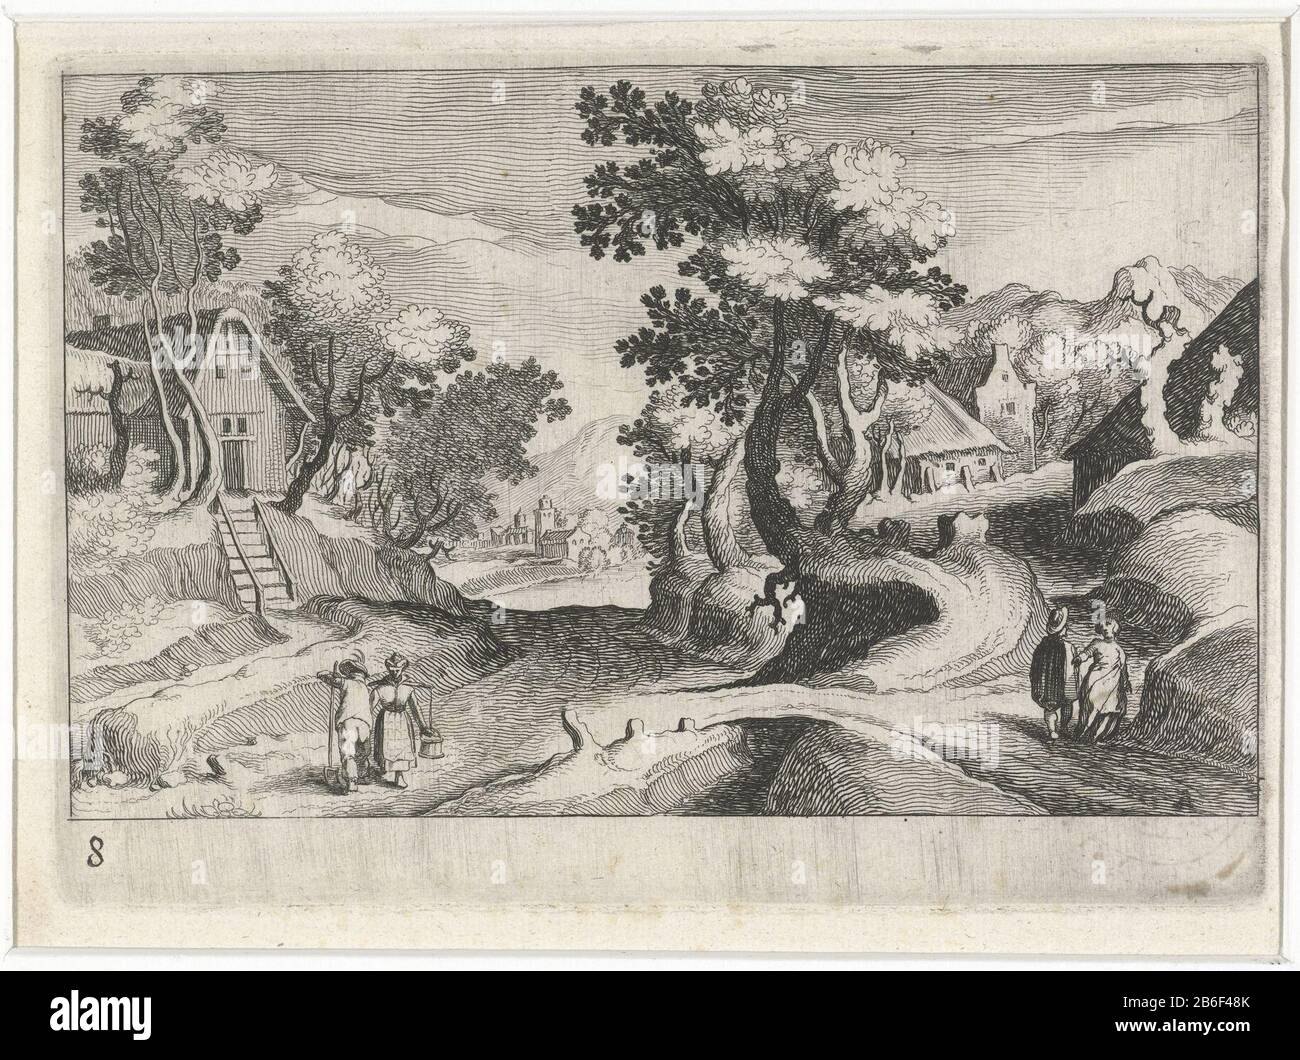 Wooded hills with buildings and figures South European landscapes (series title) Topographia Variarum Regionum (series title) left in the foreground a man leaning on a pitchfork beside a milkmaid. Right two people on a pad. Manufacturer : printmaker Simon Frisiusnaar design: Matthijs Bril Publisher: Hendrick Hondius (I) provider of privilege unknown place manufacture: printmaker: Northern Netherlands Publisher: The Hague Date: 1611 Physical features: etching material: paper Technique: etching Dimensions: plate edge: h 108 mm × W 153 mm Subject: city-view, and landscape with man-made constructi Stock Photo